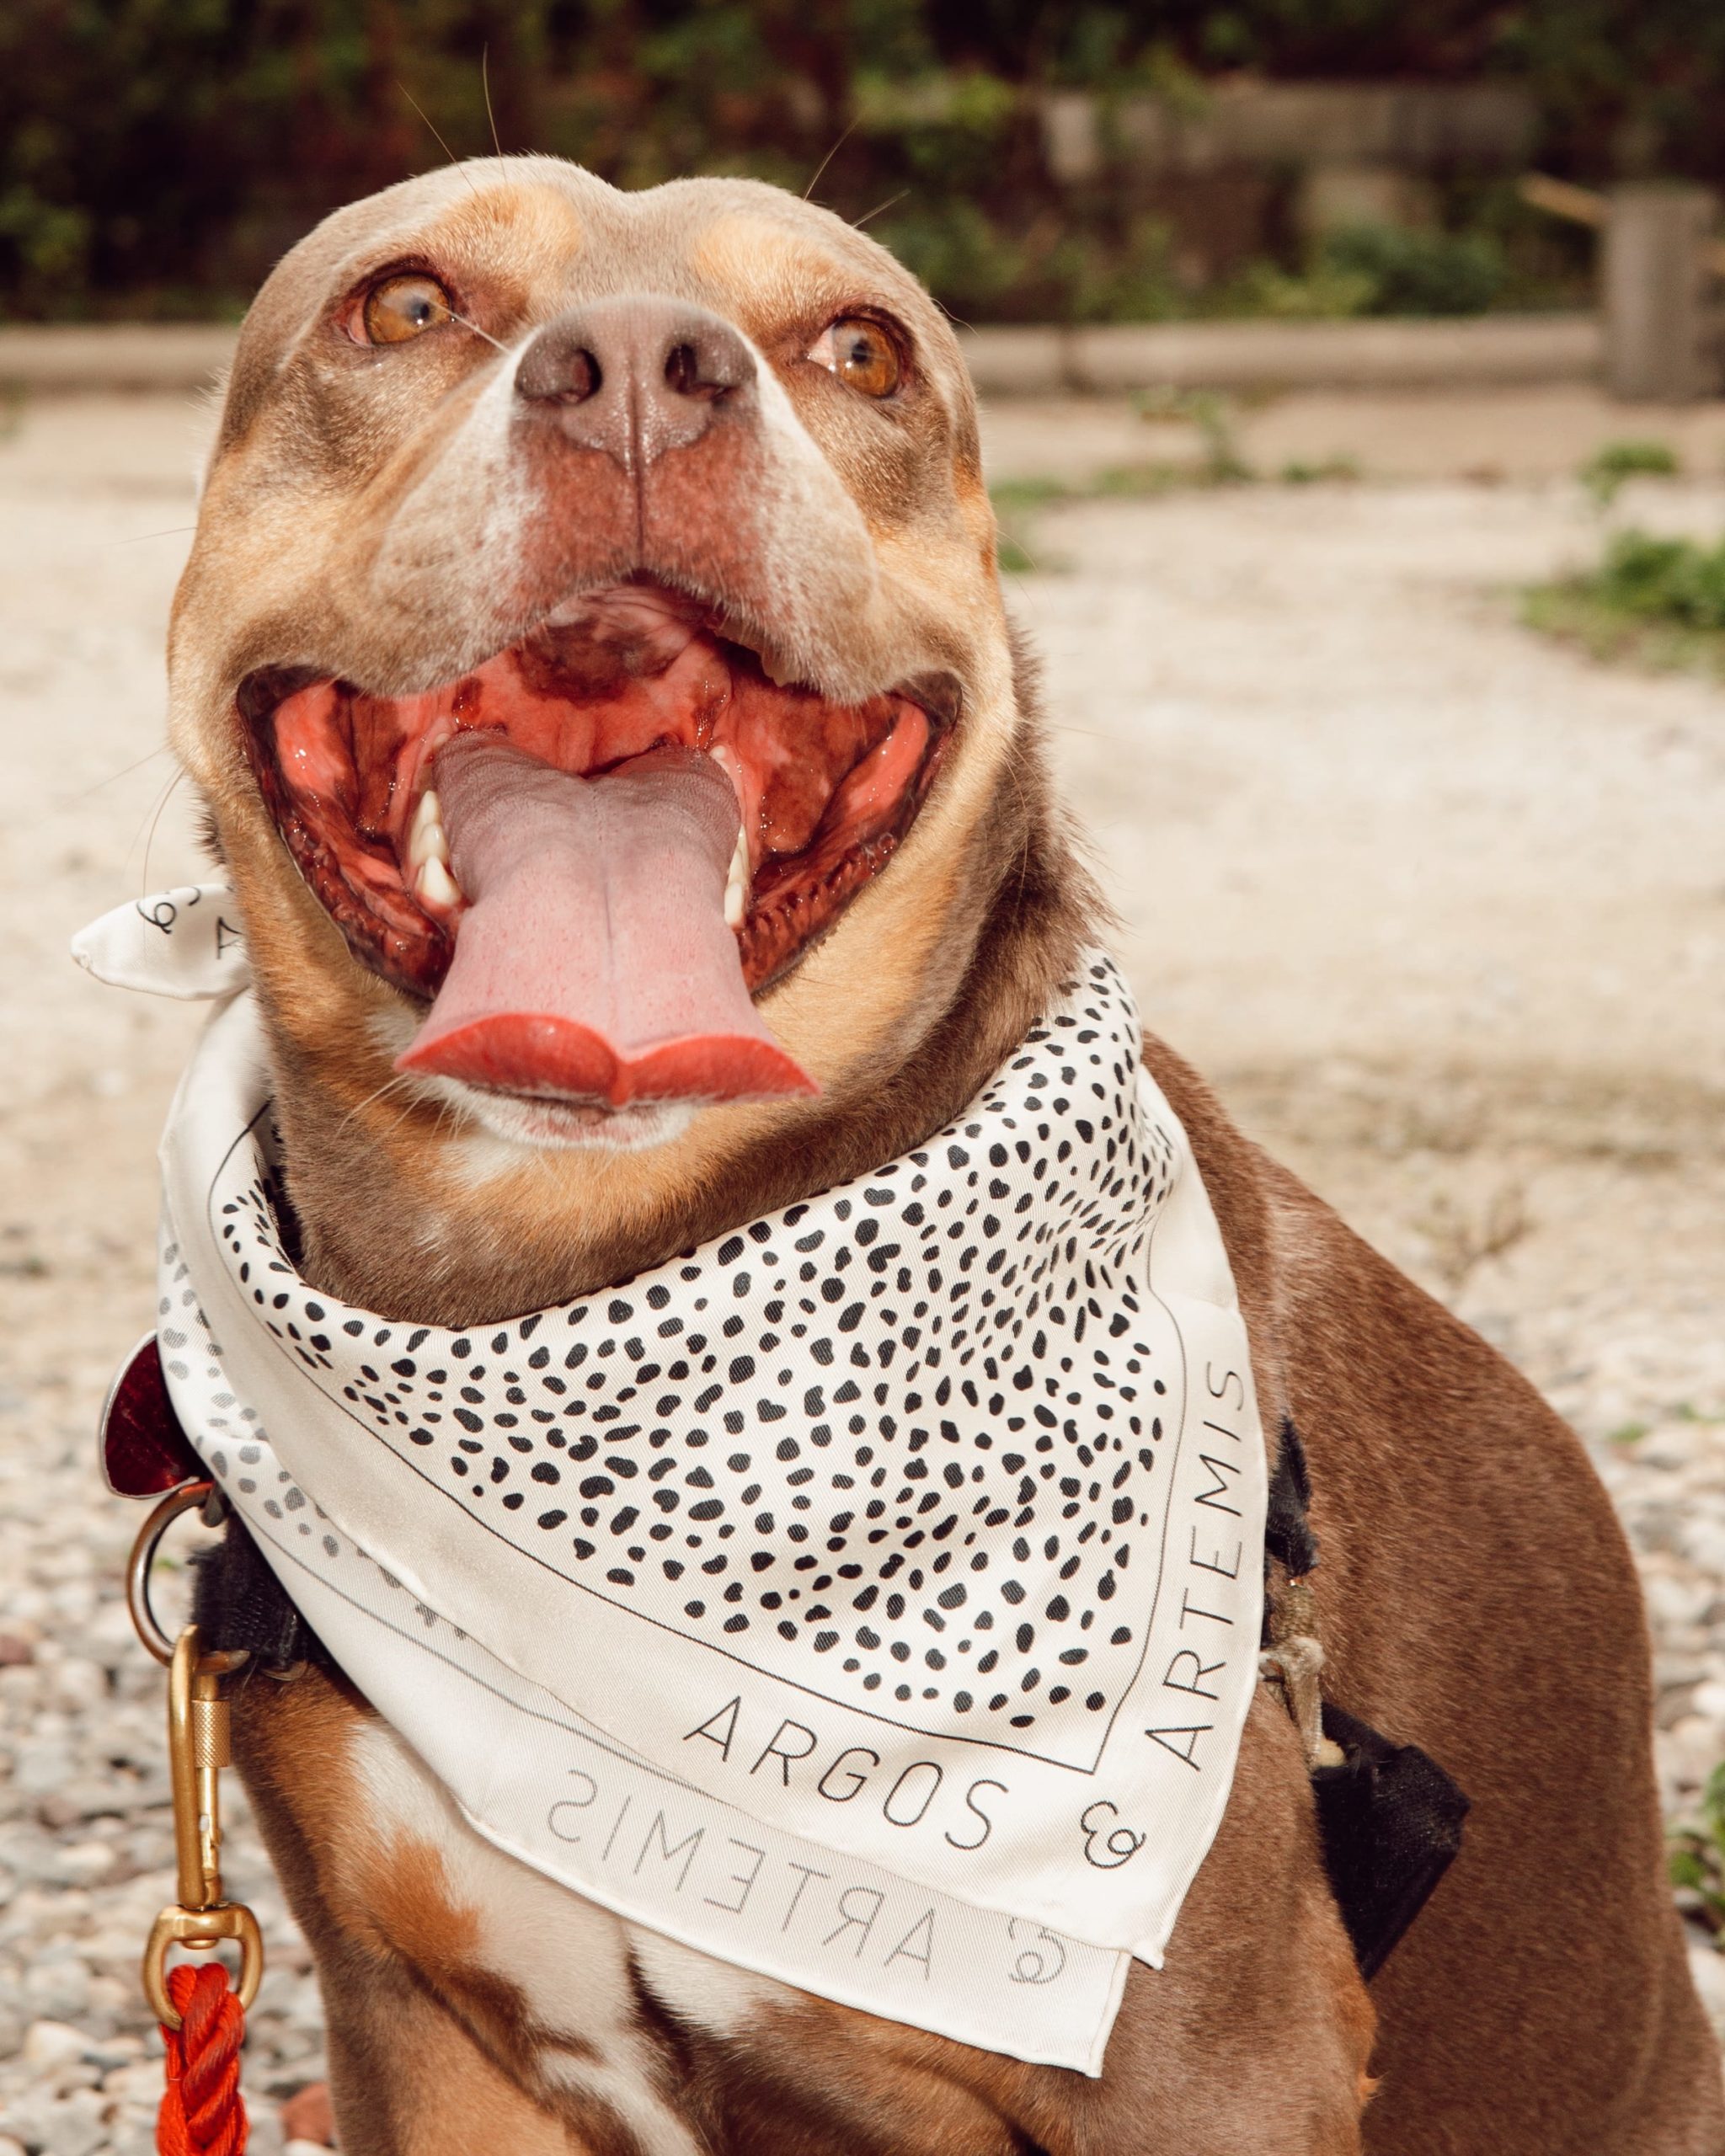 Smiling Pit Bull mix from Sato Rescue, photographed for Argos & Artemis by Tayler Smith.